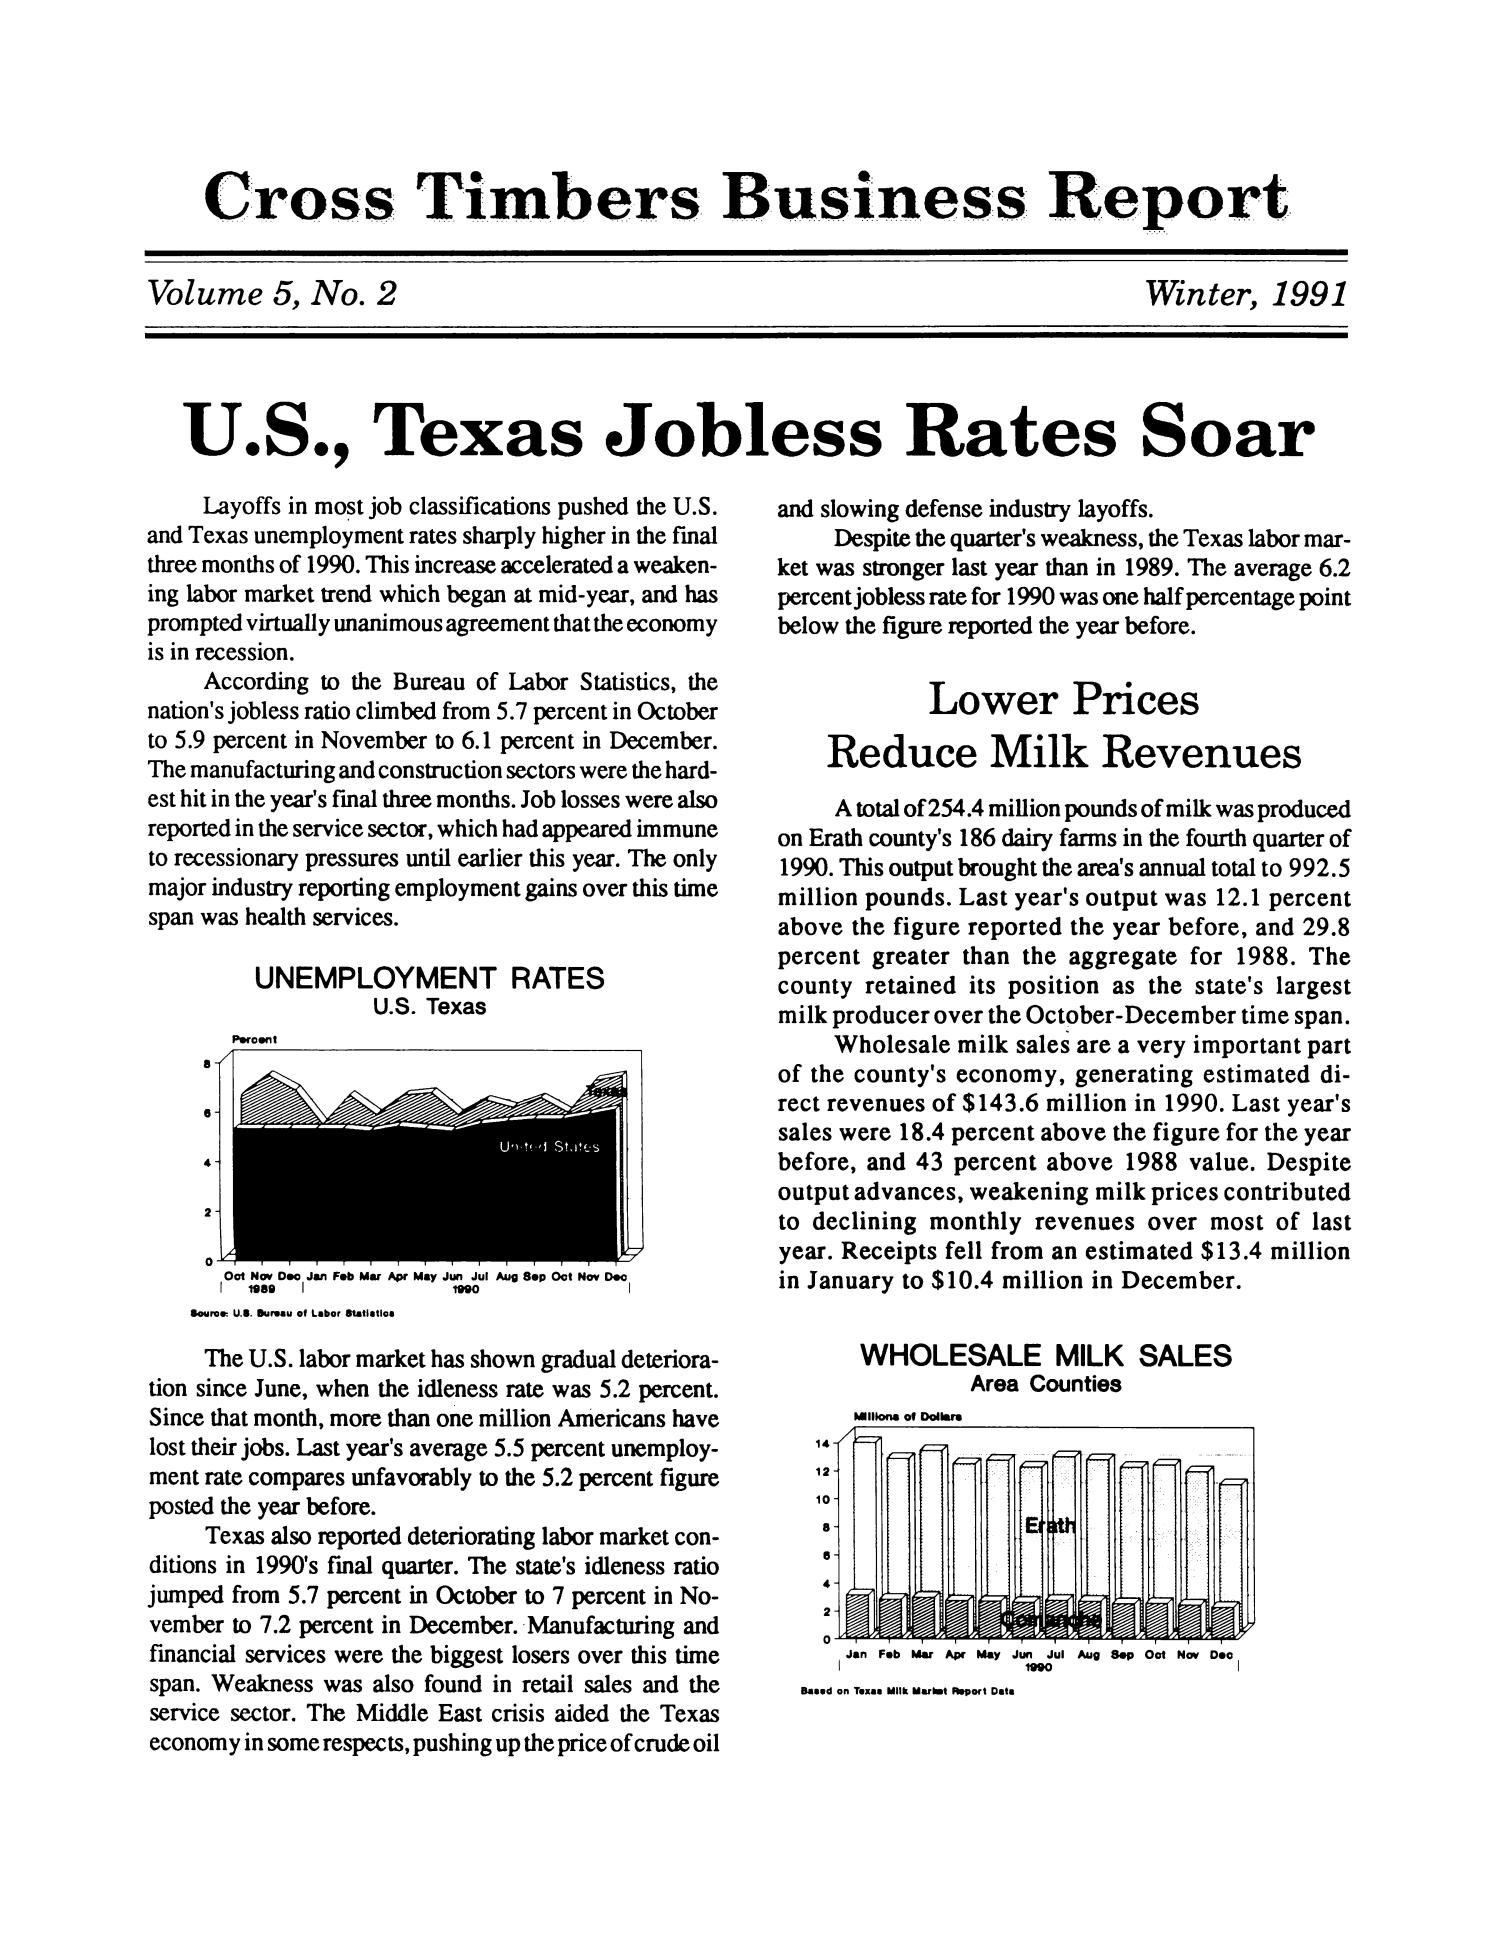 Cross Timbers Business Report, Volume 5, Number 2, Winter 1991
                                                
                                                    1
                                                